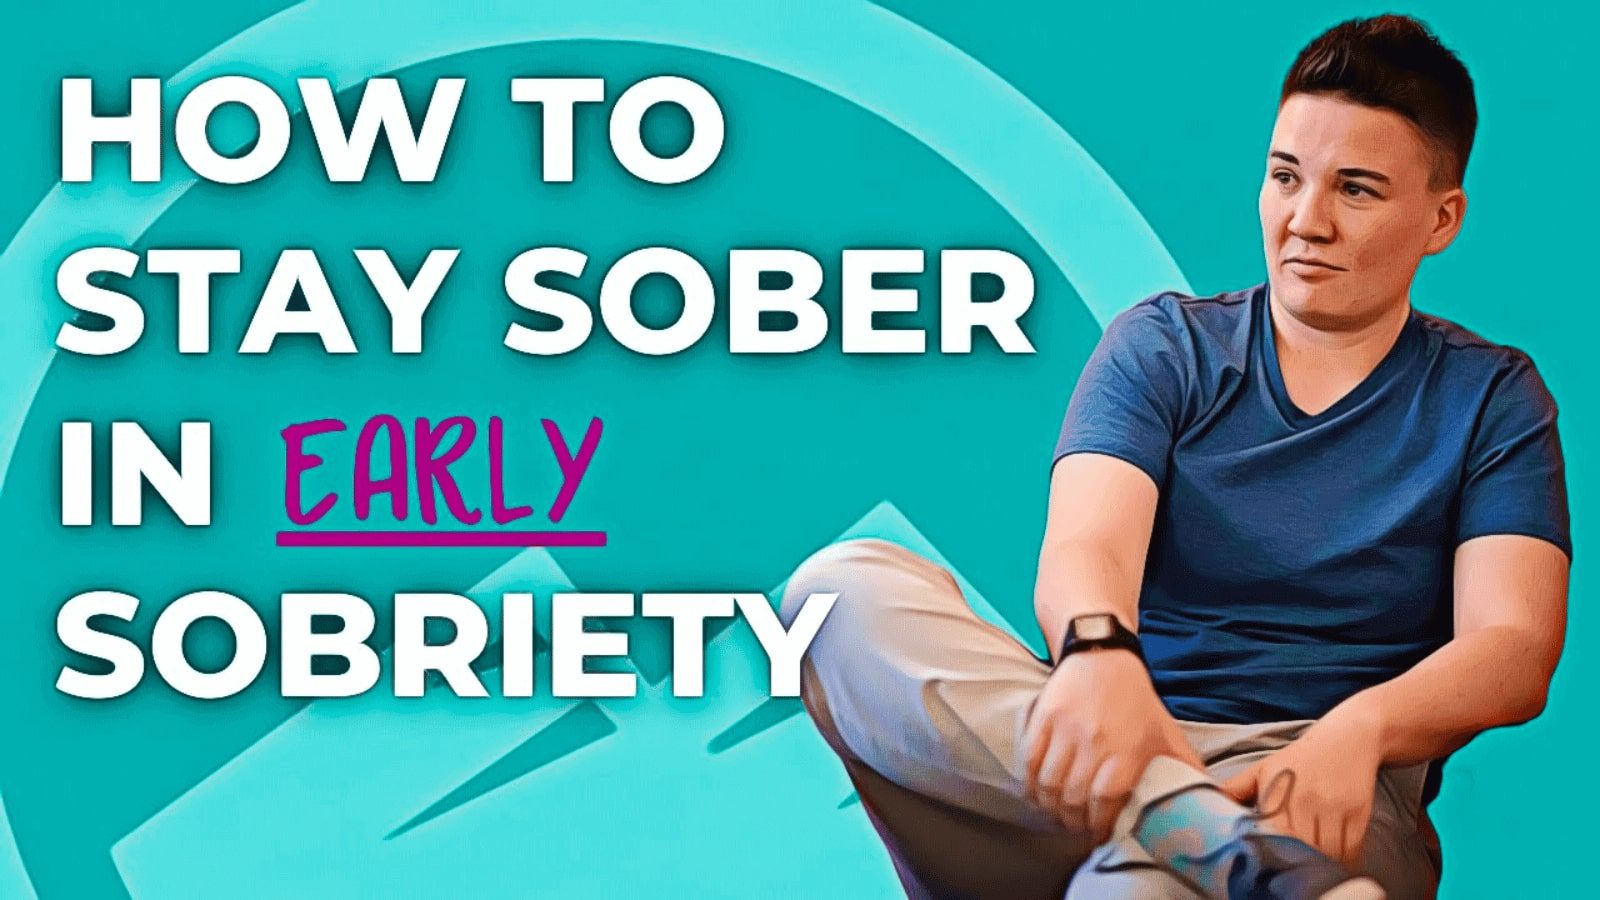 How to stay sober in early sobriety text next to an image of a person sitting with legs crossed